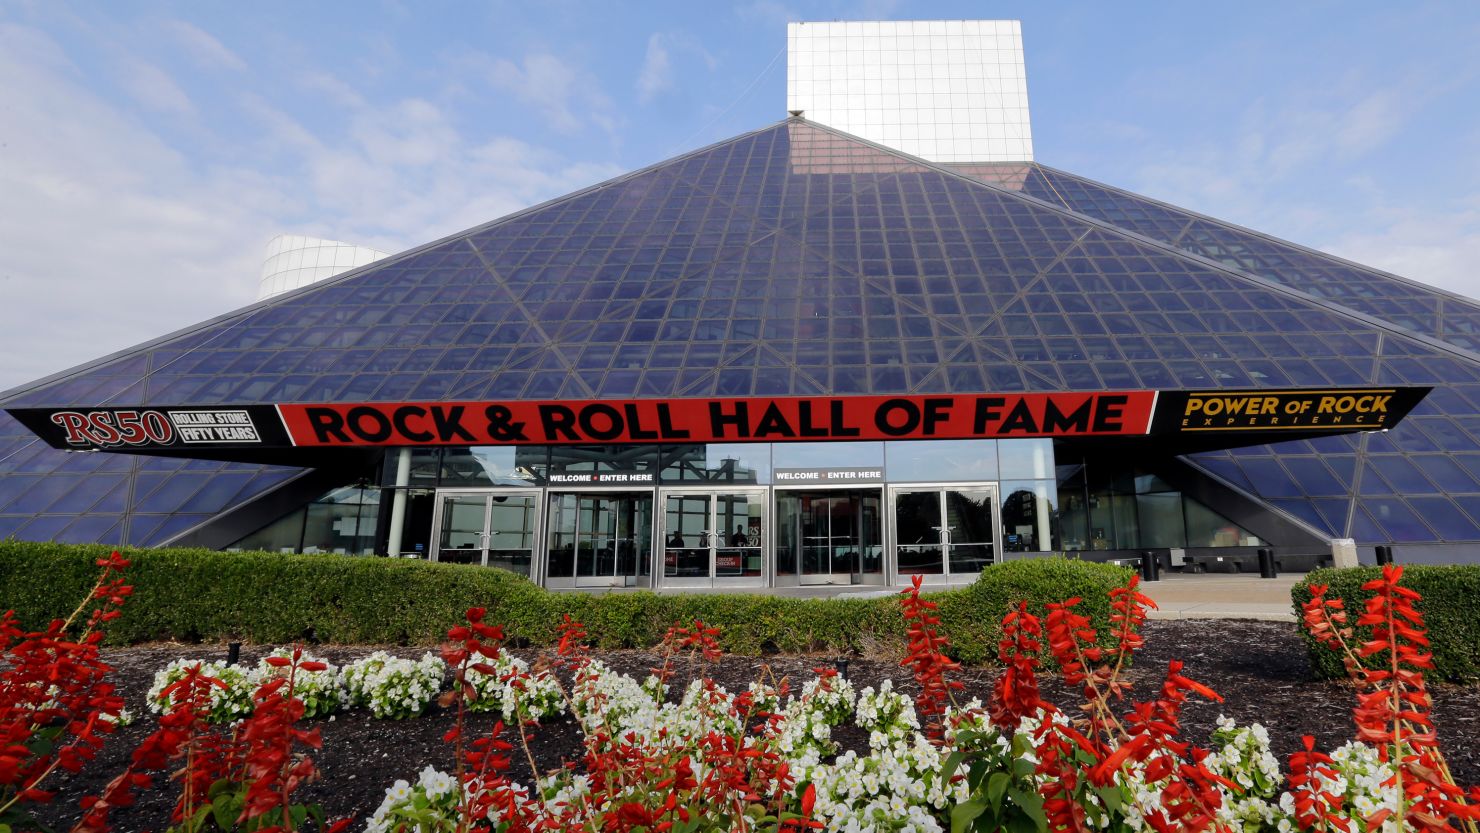 Video Journey gets Rock and Roll Hall of Fame induction - ABC News